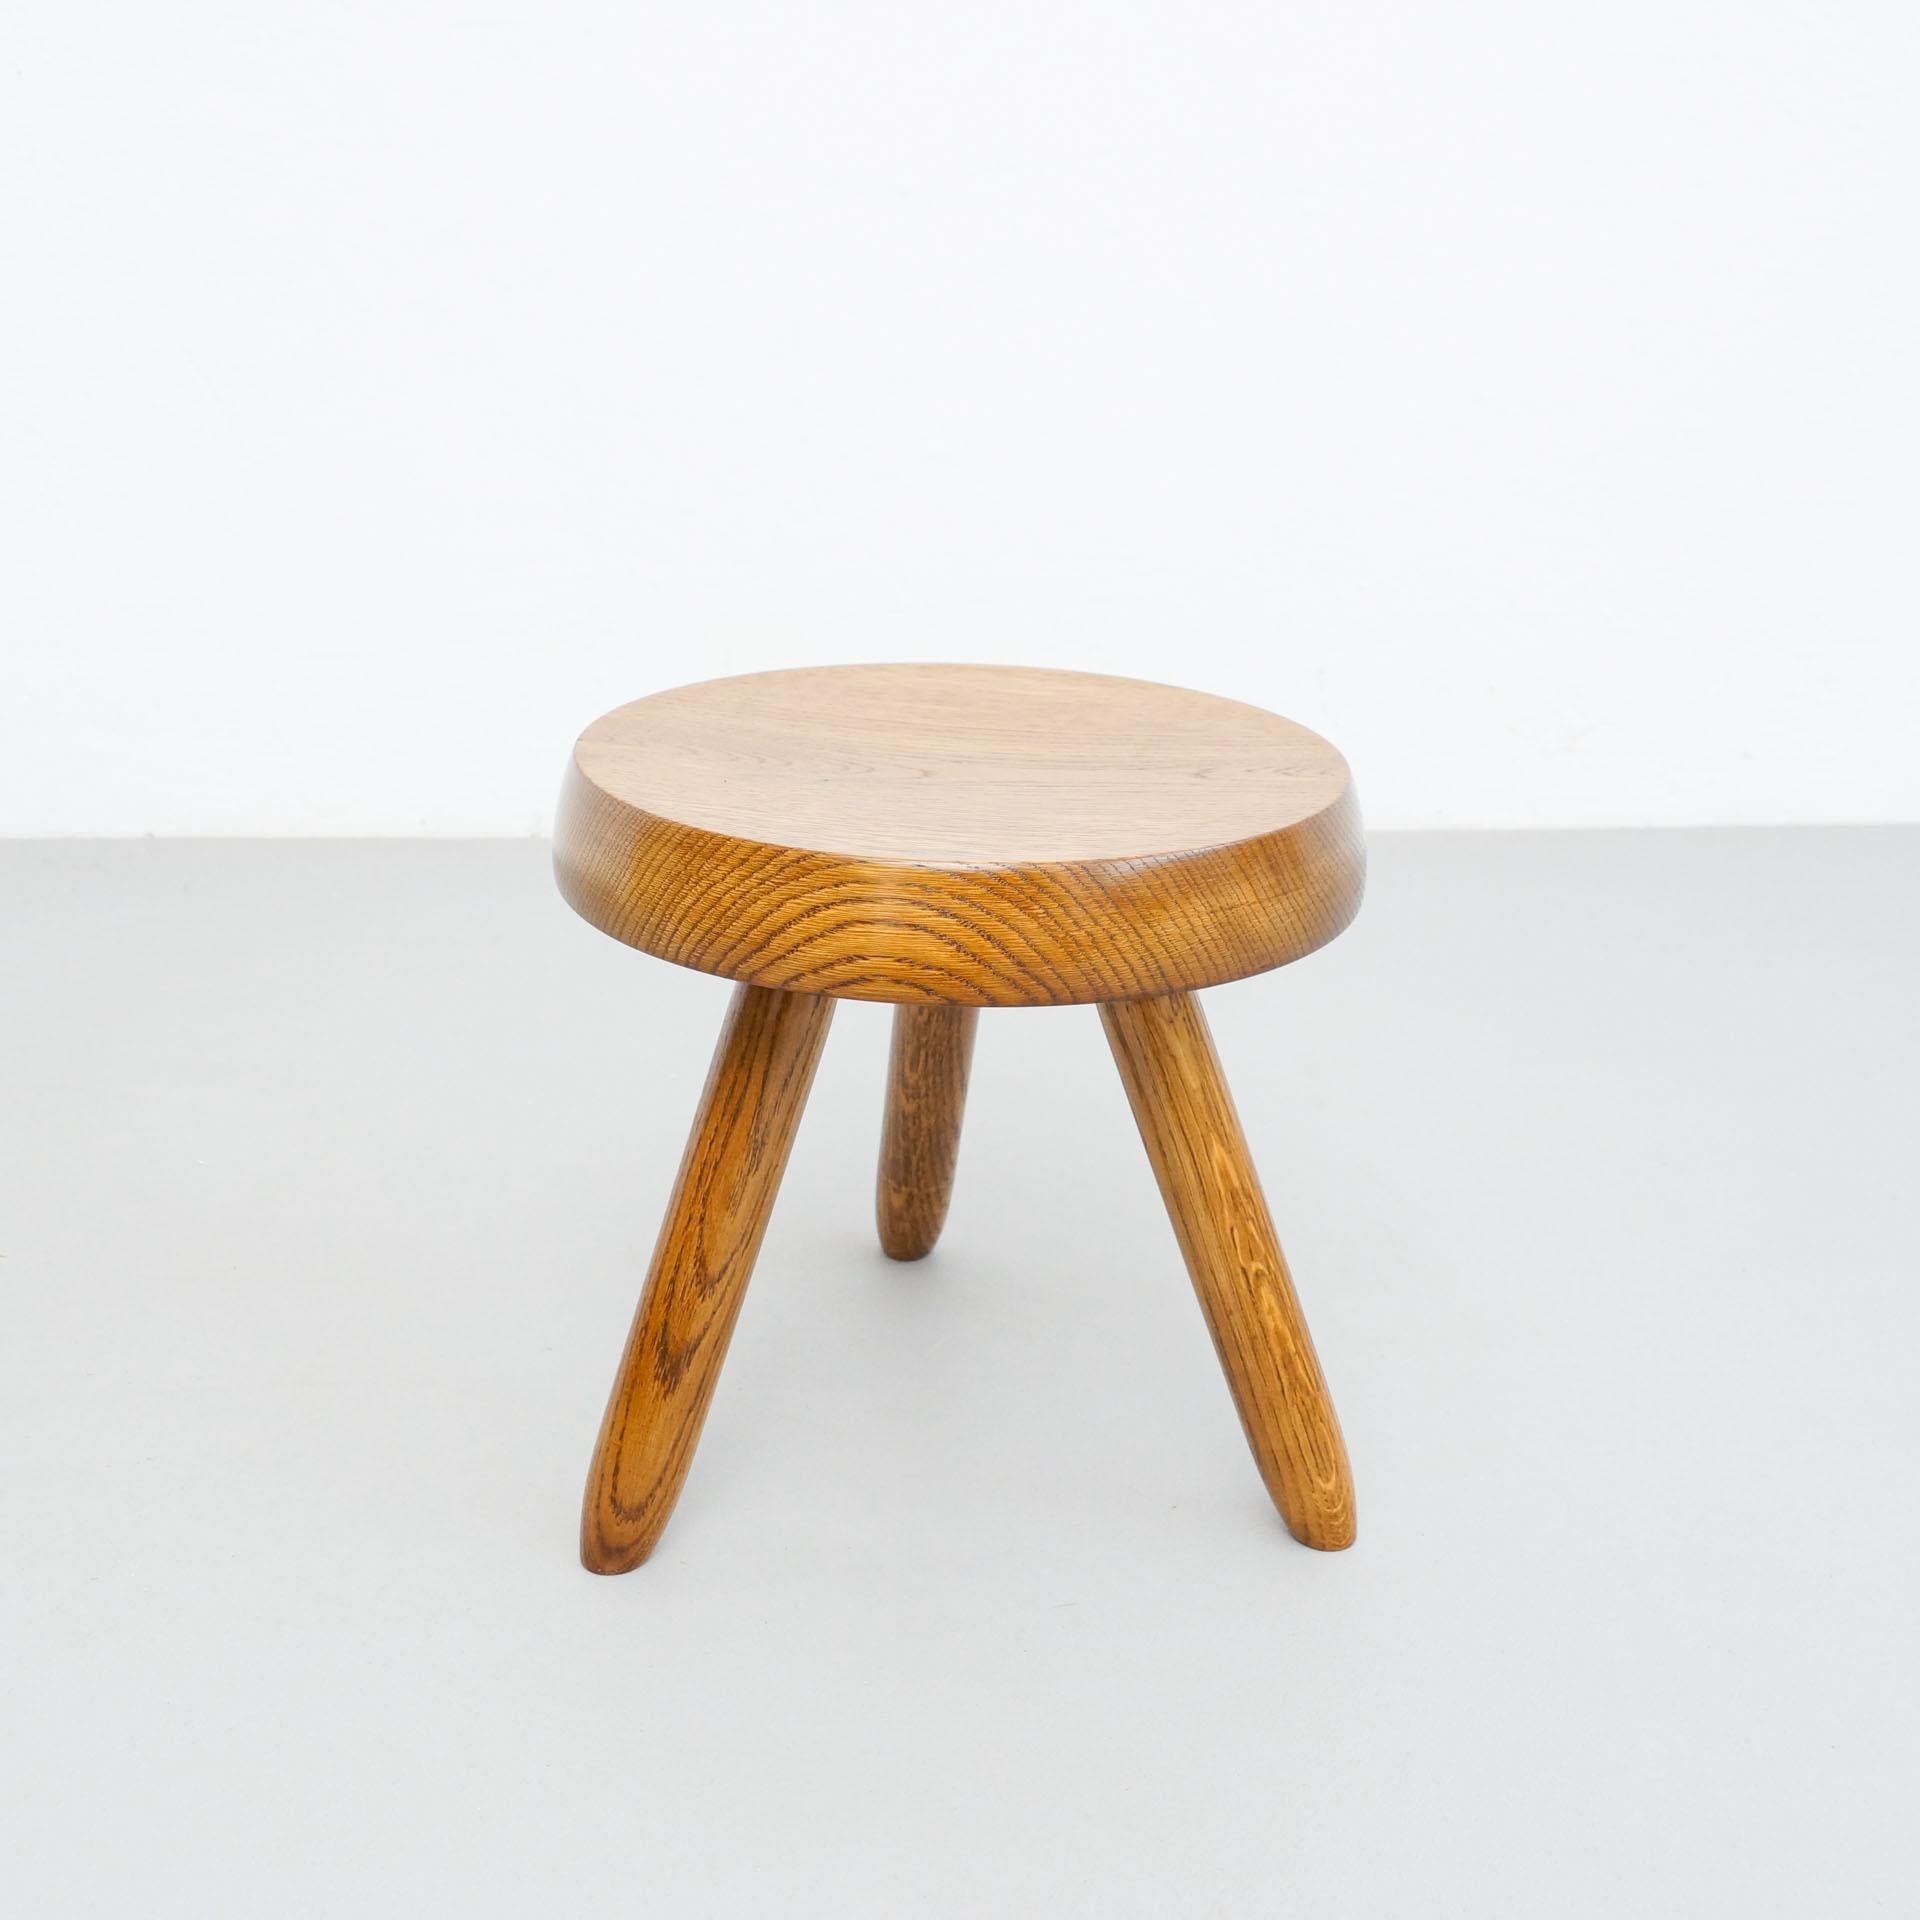 Late 20th Century Mid-Century Modern Set of Two Stools in the Style of Charlotte Perriand